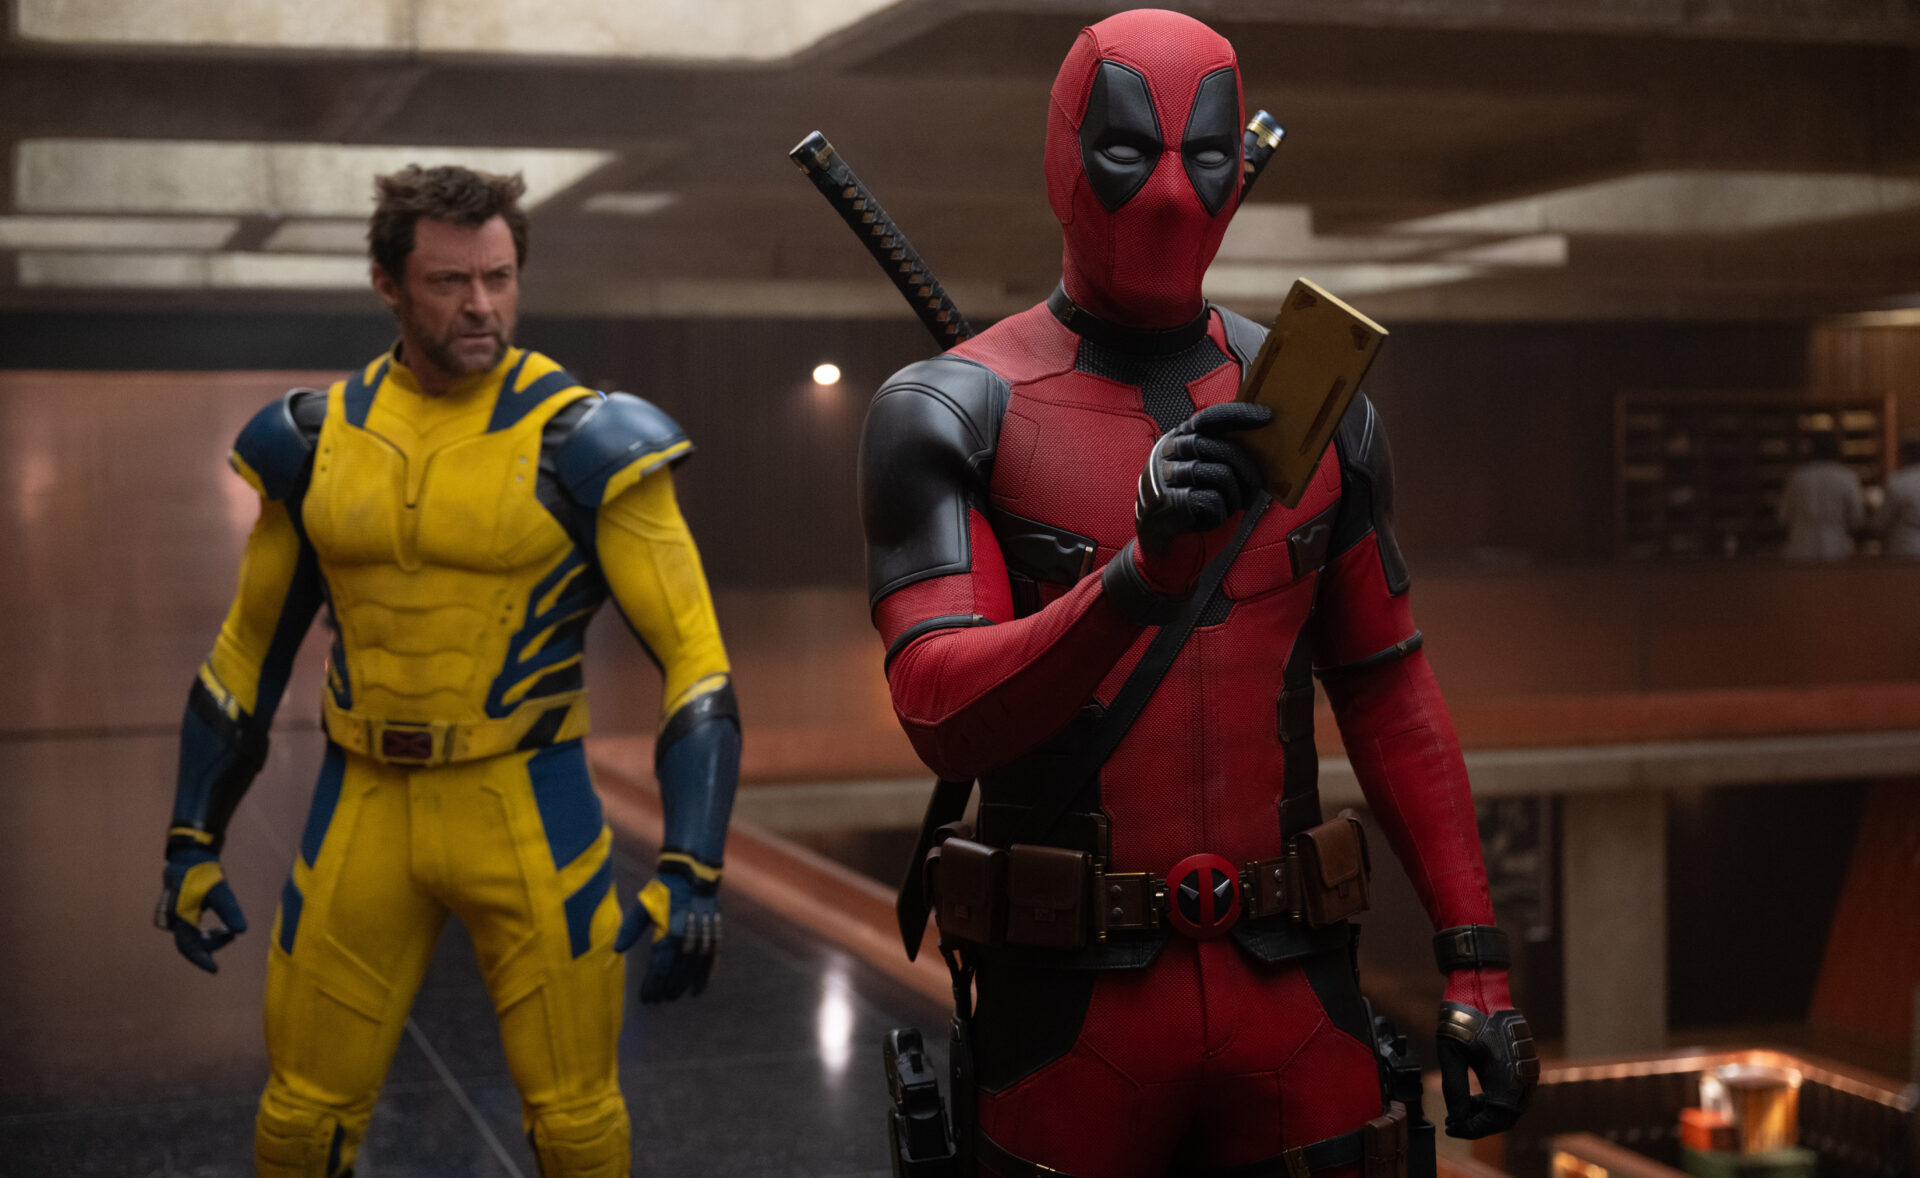 Marvel Studio's only cinematic offering of the year, Deadpool and Wolverine, is preparing to slice multiple records wide open in its debut weekend.